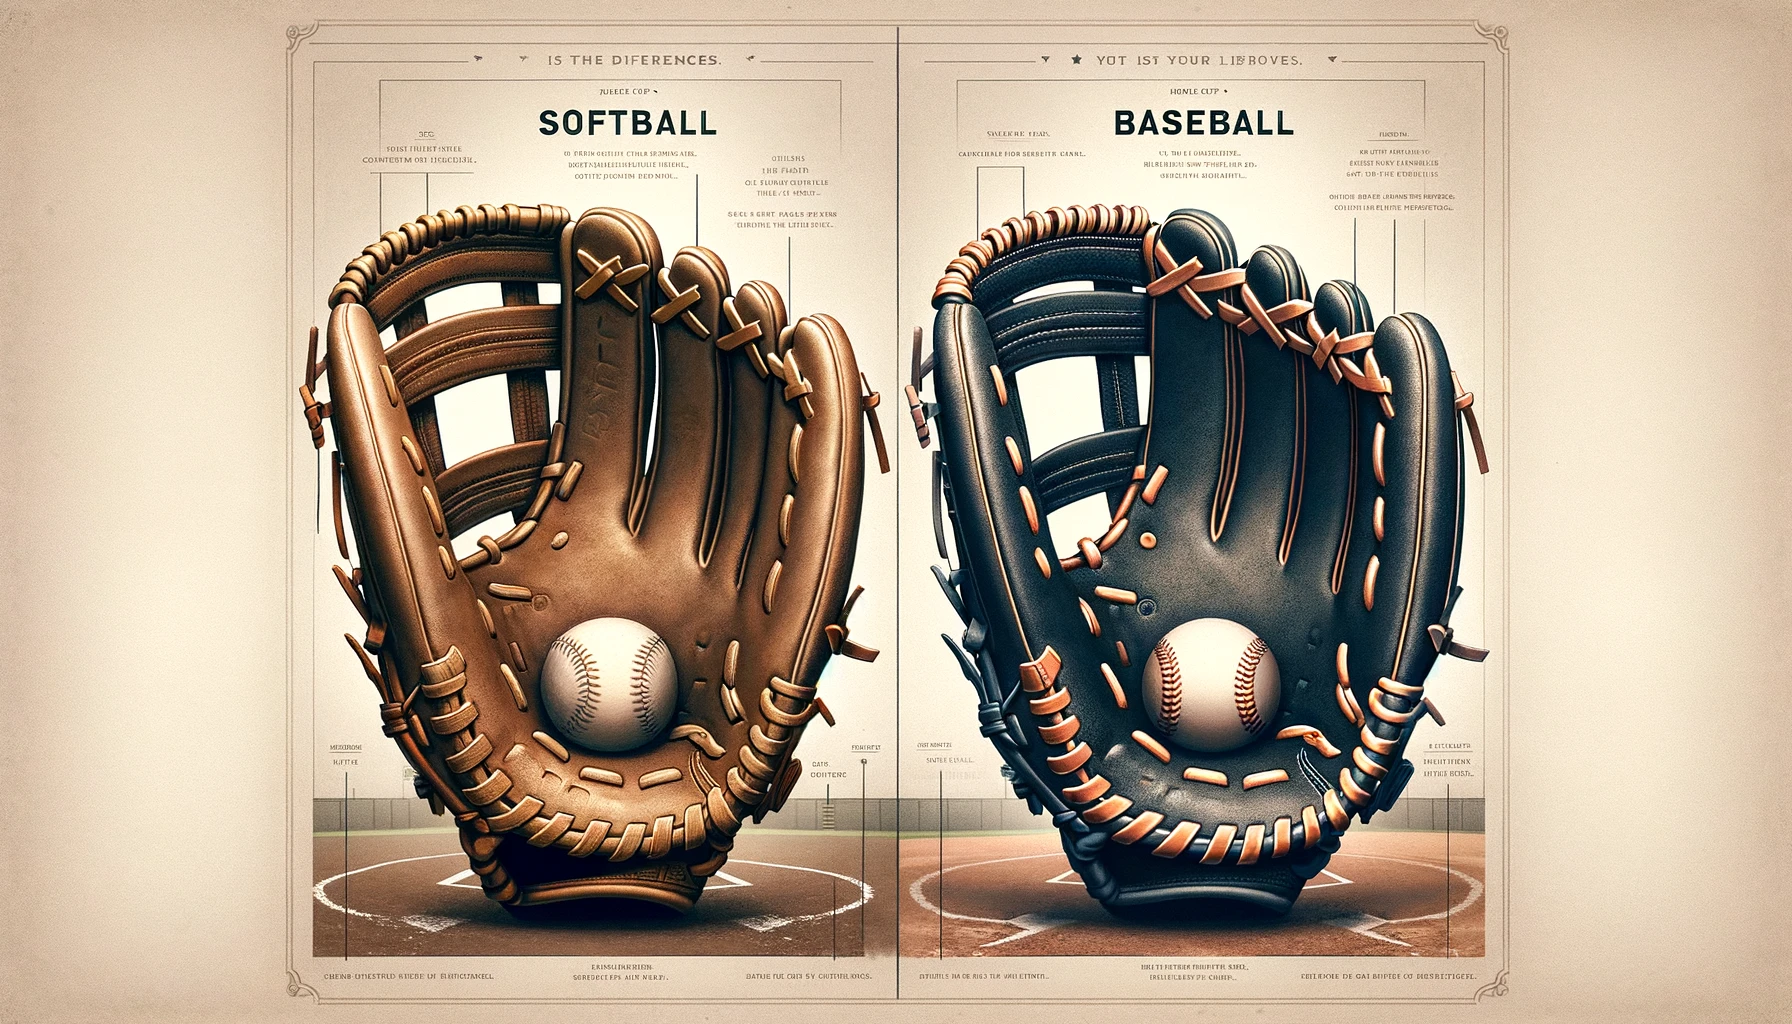 Is There a Difference Between Softball and Baseball Gloves?